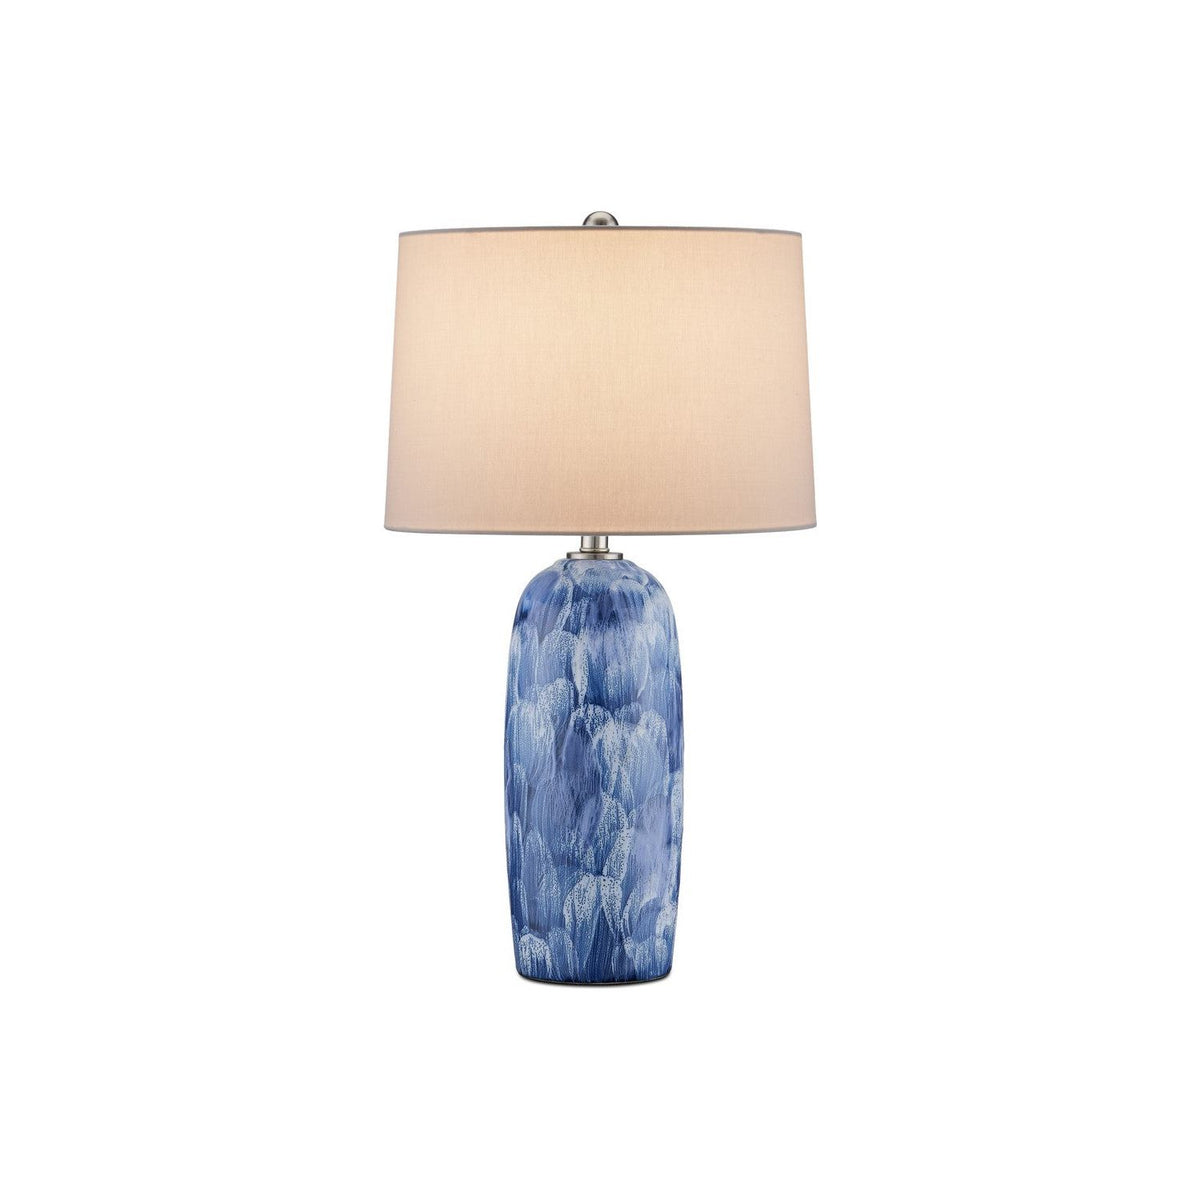 Currey and Company - 6000-0951 - One Light Table Lamp - Blue/White/Brushed Nickel